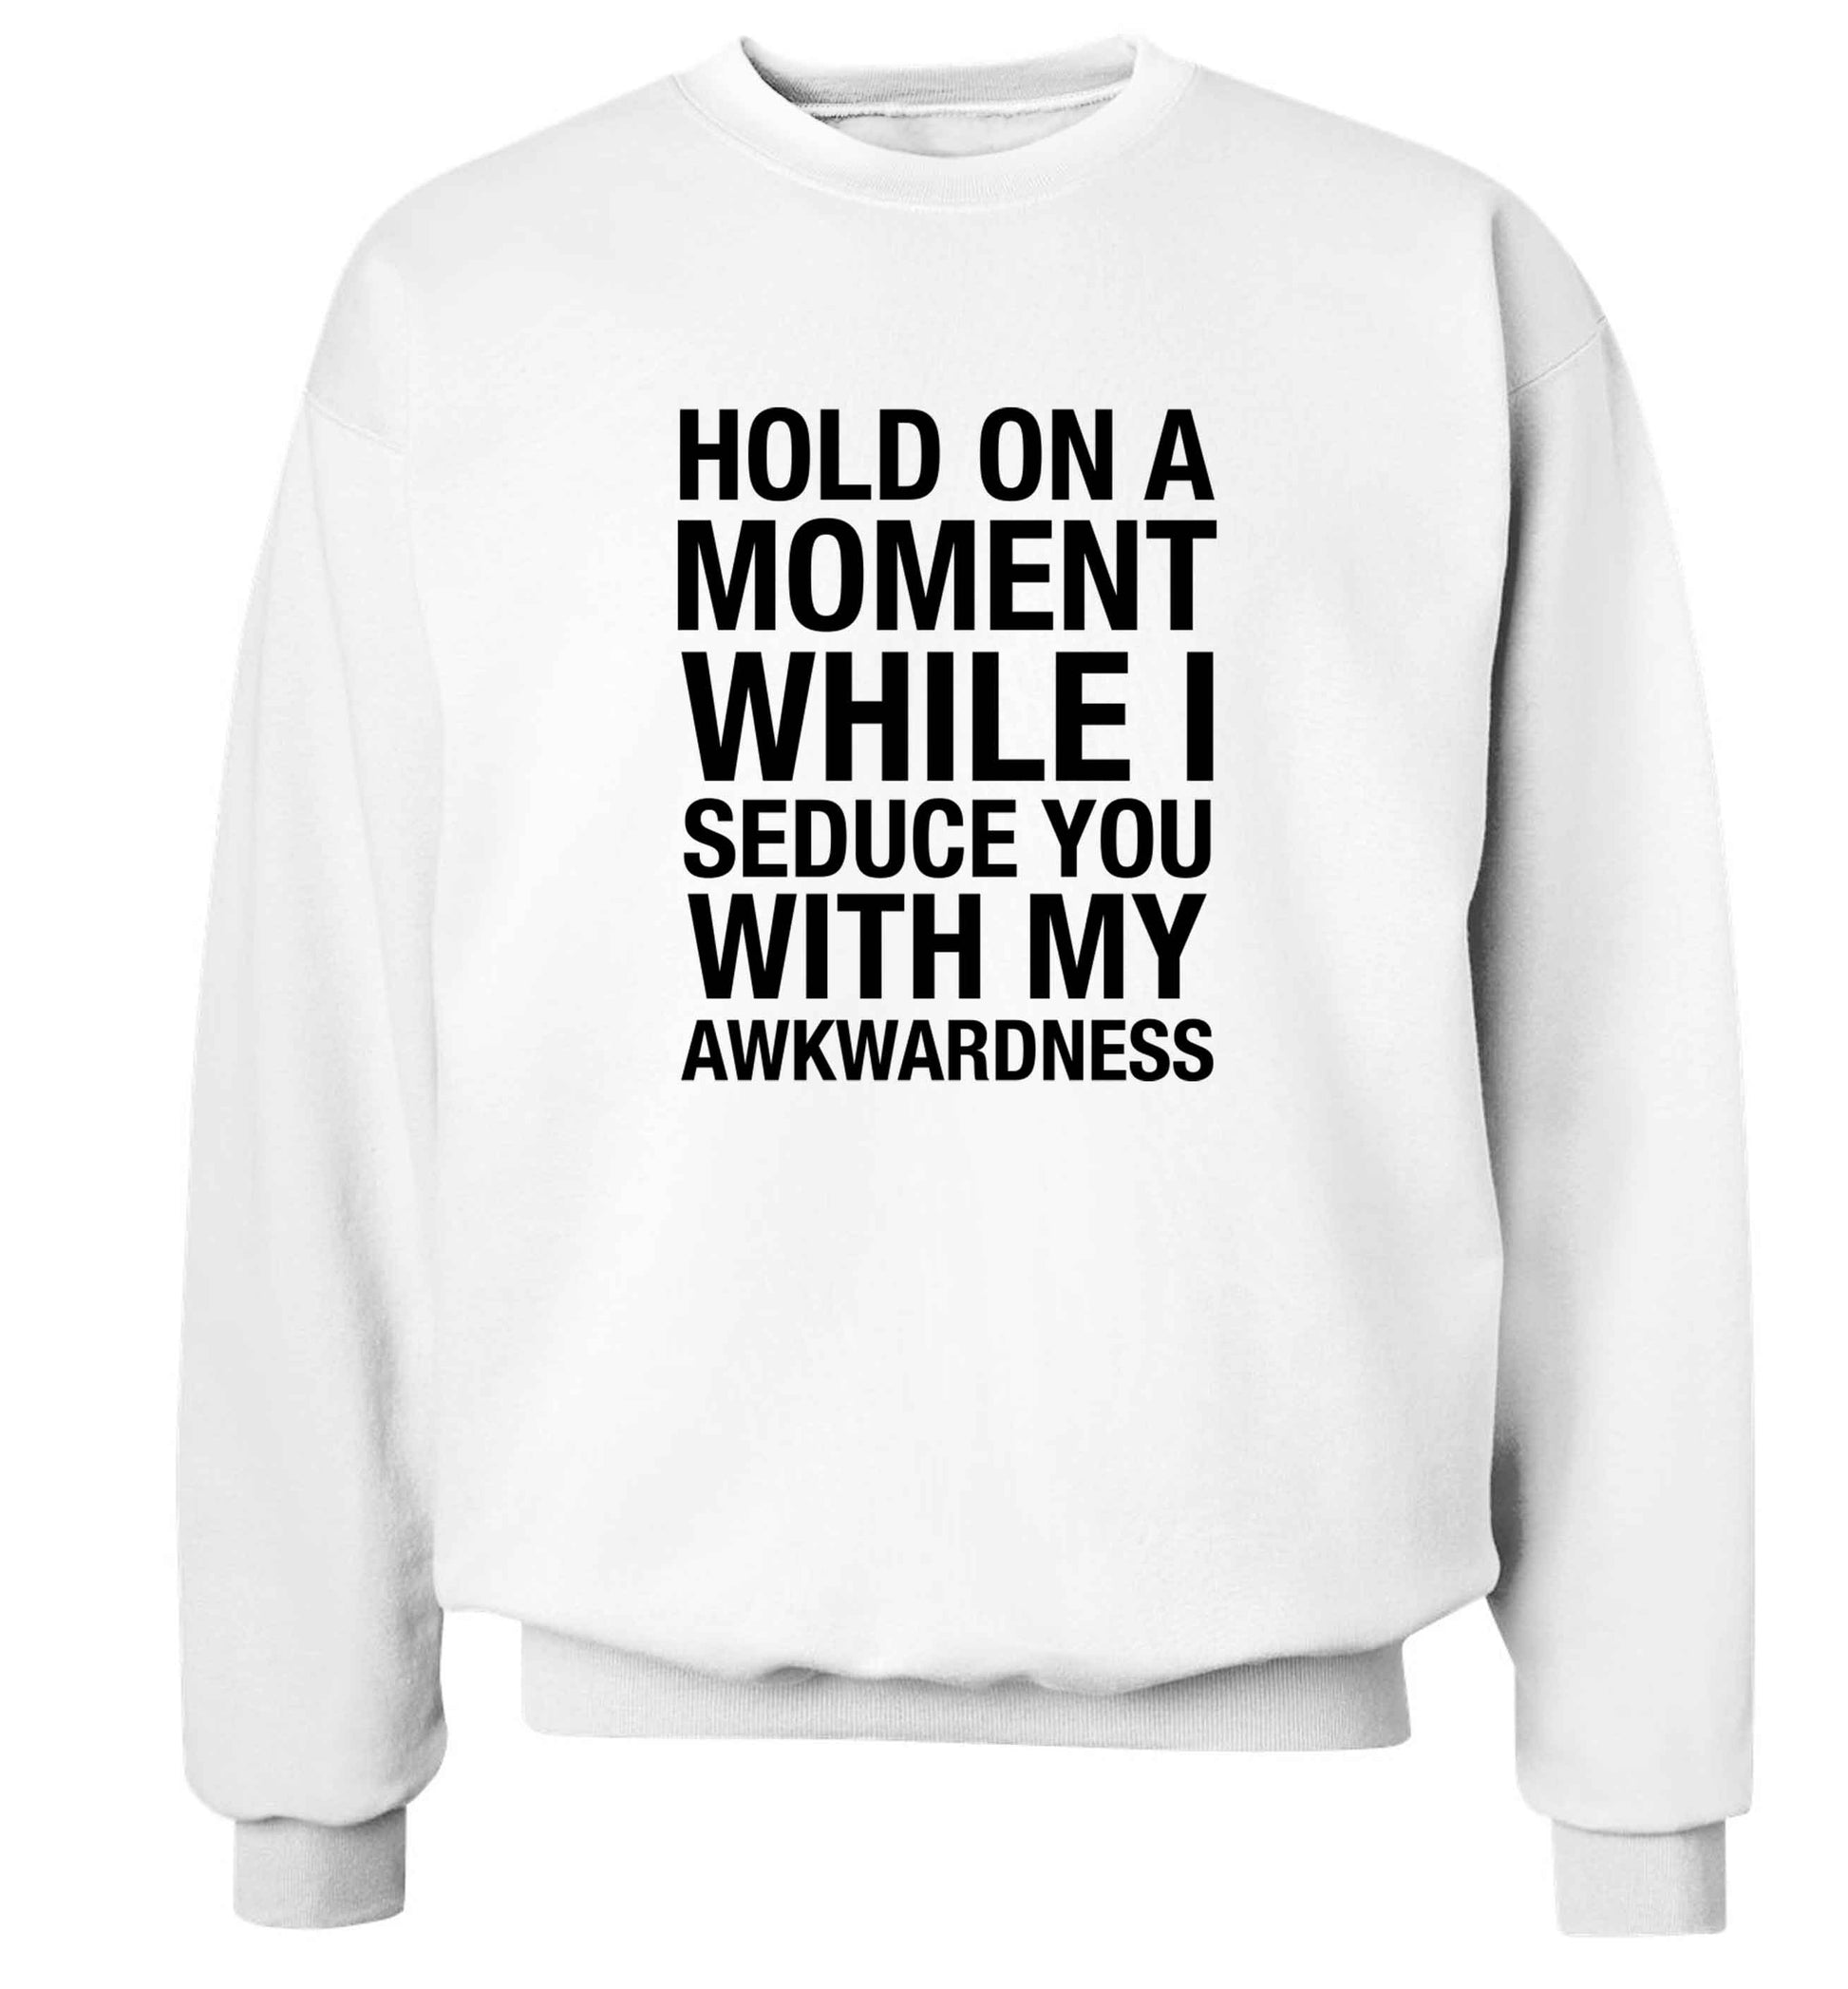 Hold on a moment while I seduce you with my awkwardness adult's unisex white sweater 2XL